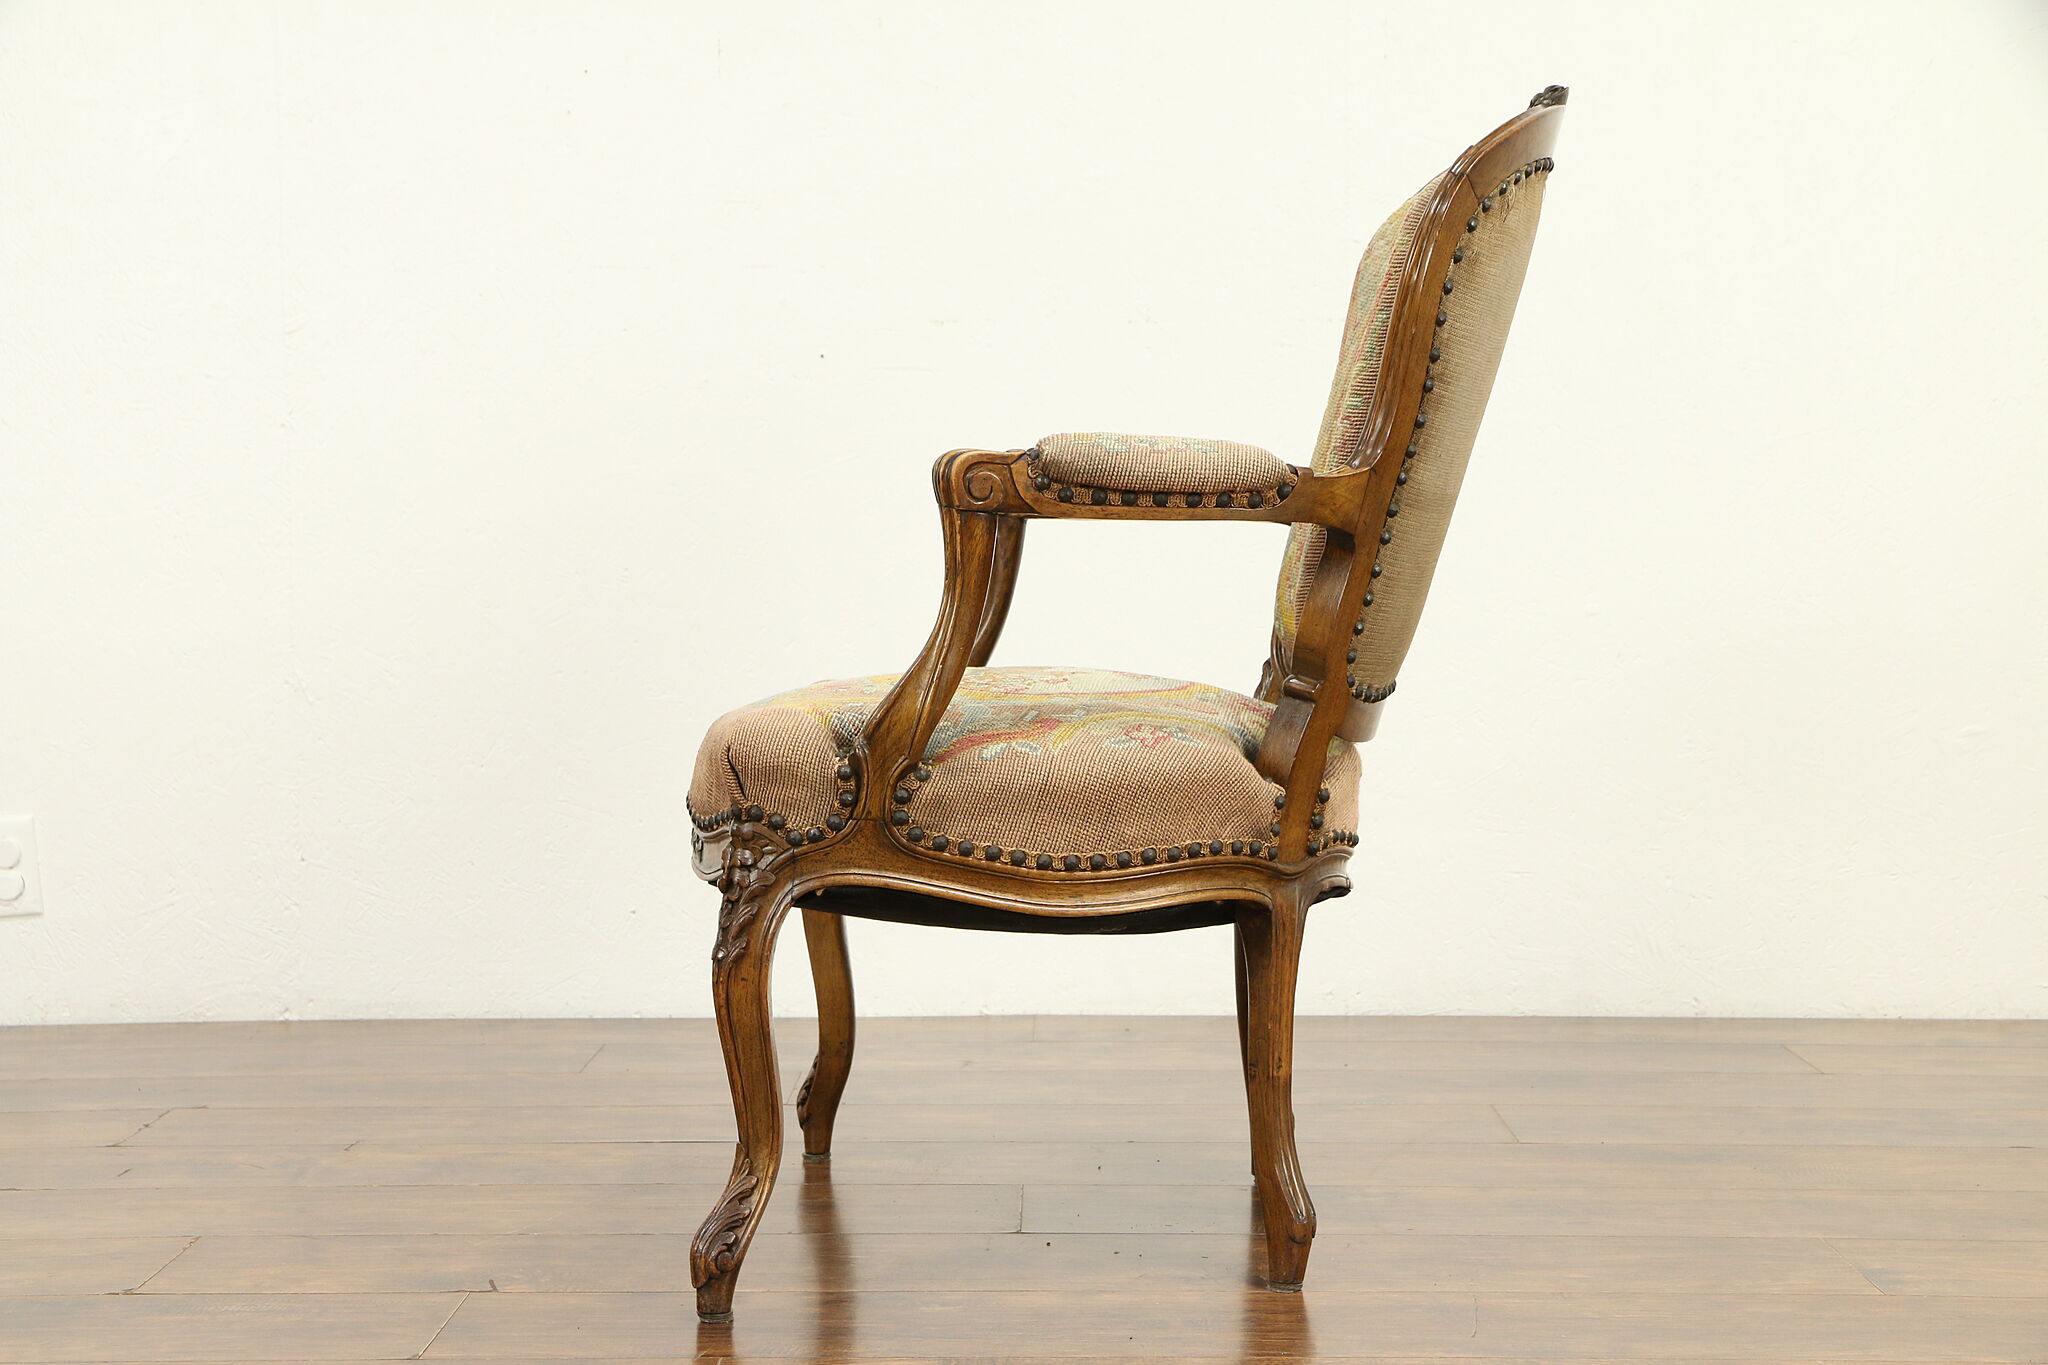 Country French Antique Chair, Handstitched Needlepoint